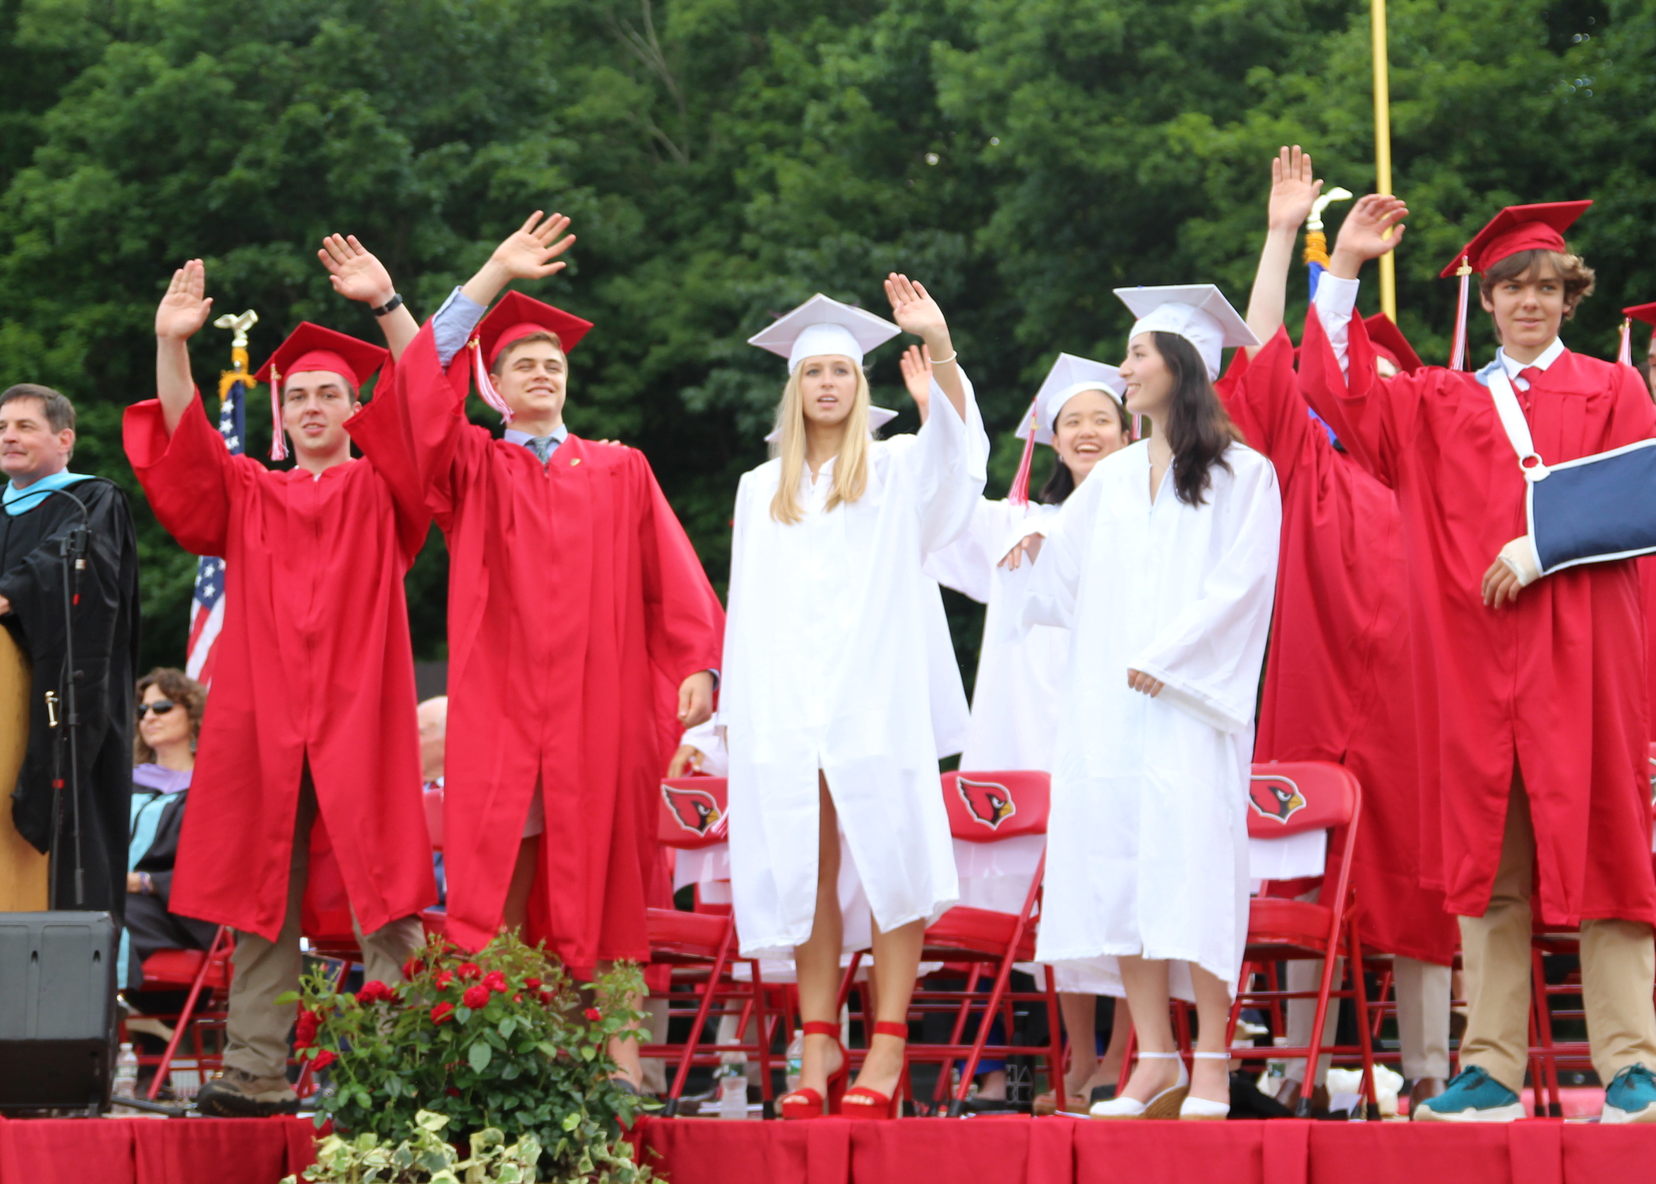 Leaders of the class of 2019 on the podium wave to their classmates and families at graduation. June 17, 2019 Photo: Leslie Yager